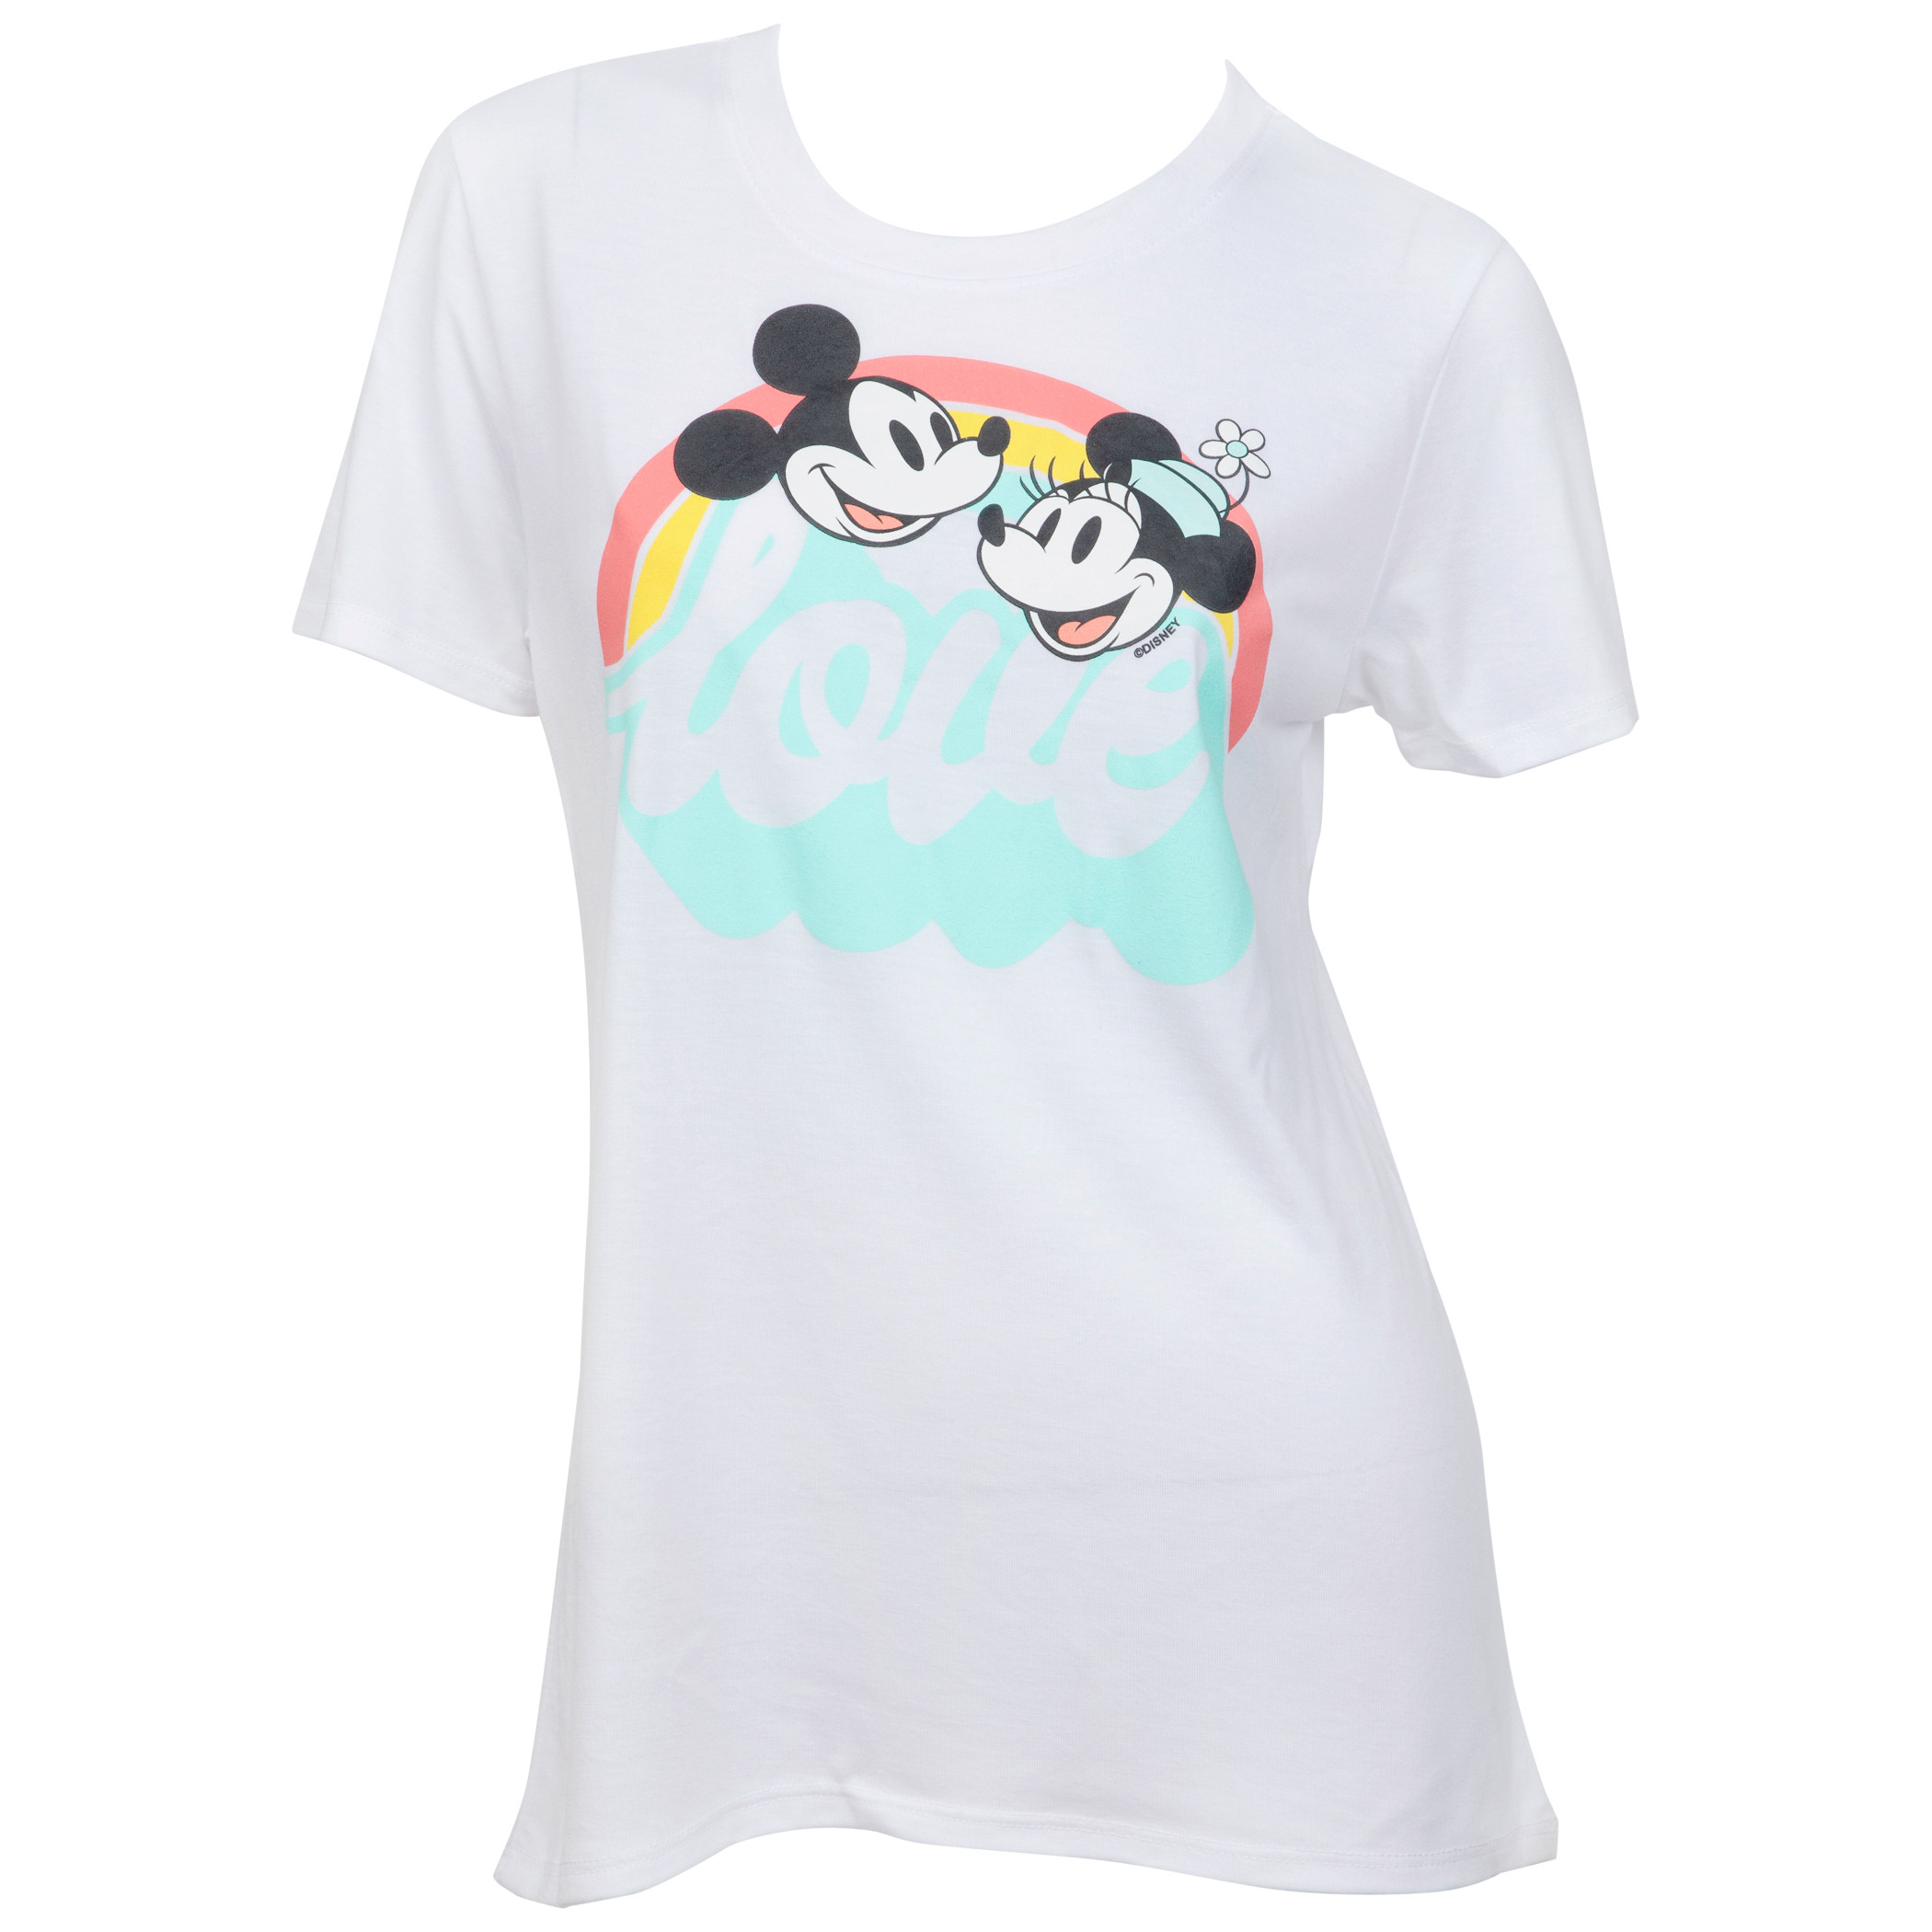 Mickey and Minnie Mouse Love Women's T-Shirt